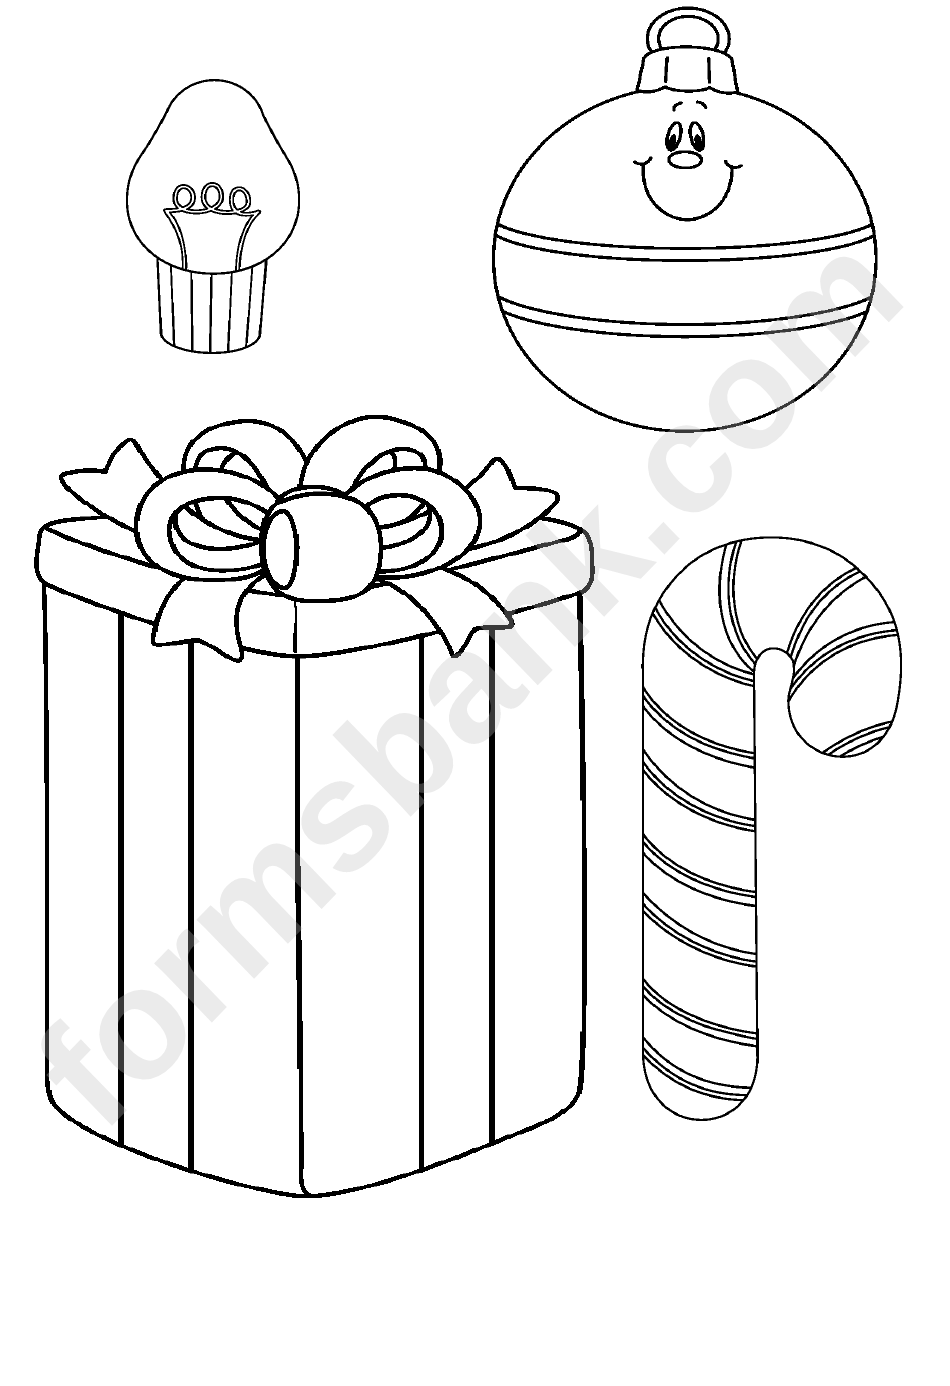 Christmas Tree And Decorations Coloring Sheets